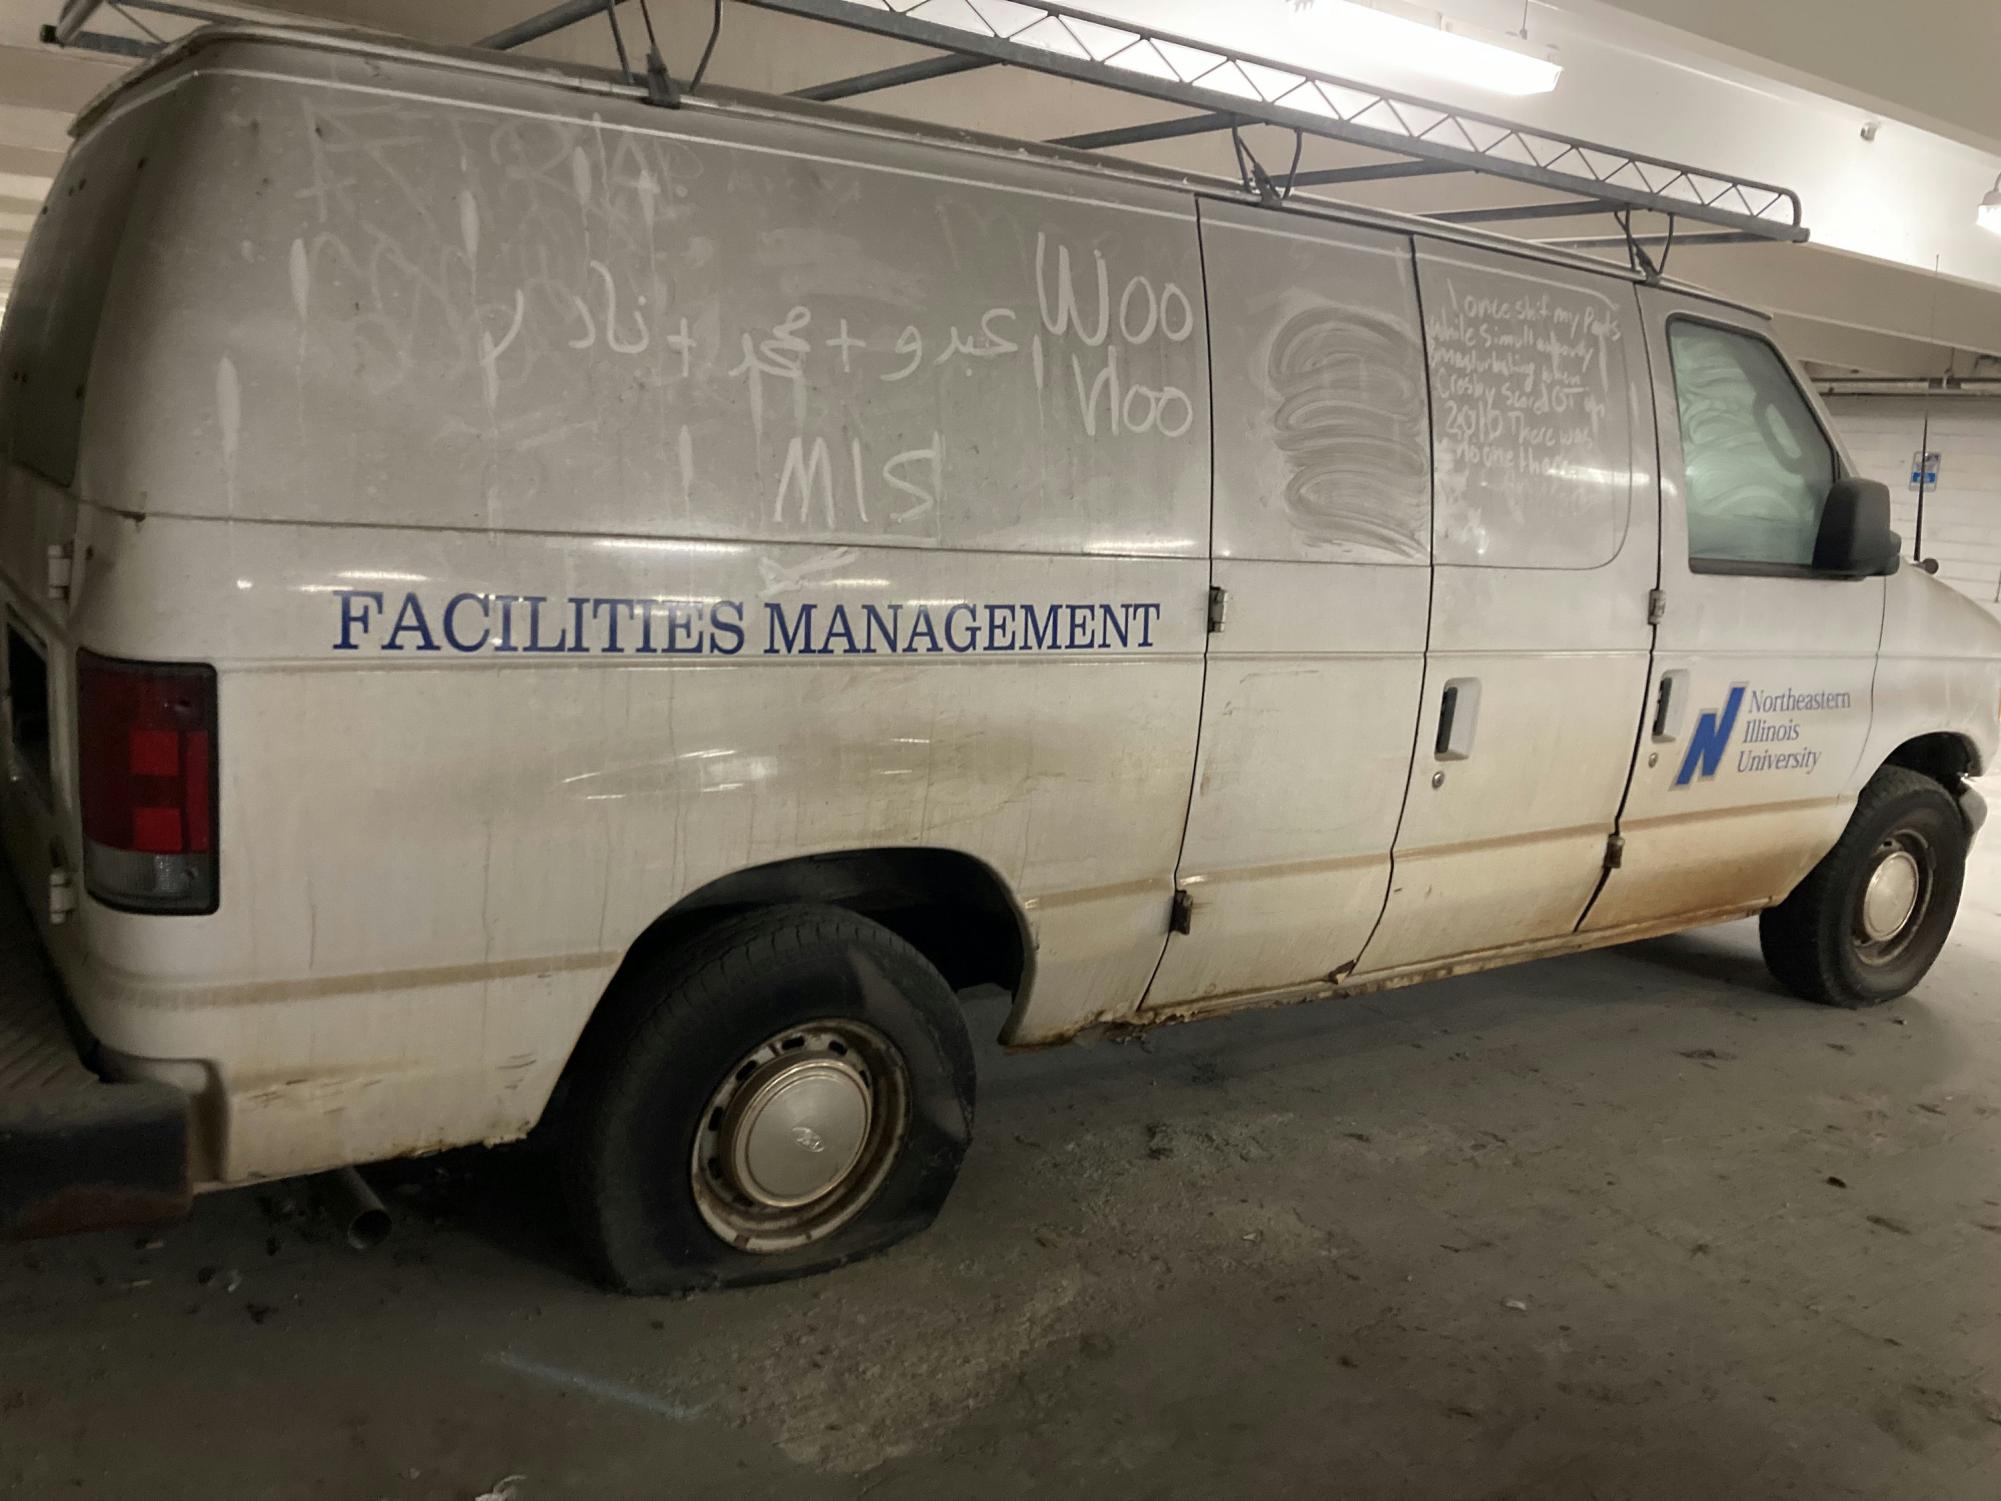 Facilities Management white panel van that was located in the parking garage behind the police station on March 26, 2023. The van in the picture is covered in a visible layer of dust and has a flat tire. Words and pictures have been drawn in the dust on the van. One dust tracing, reportedly made be a BSW, changes the logo to Facilities MisManagement.